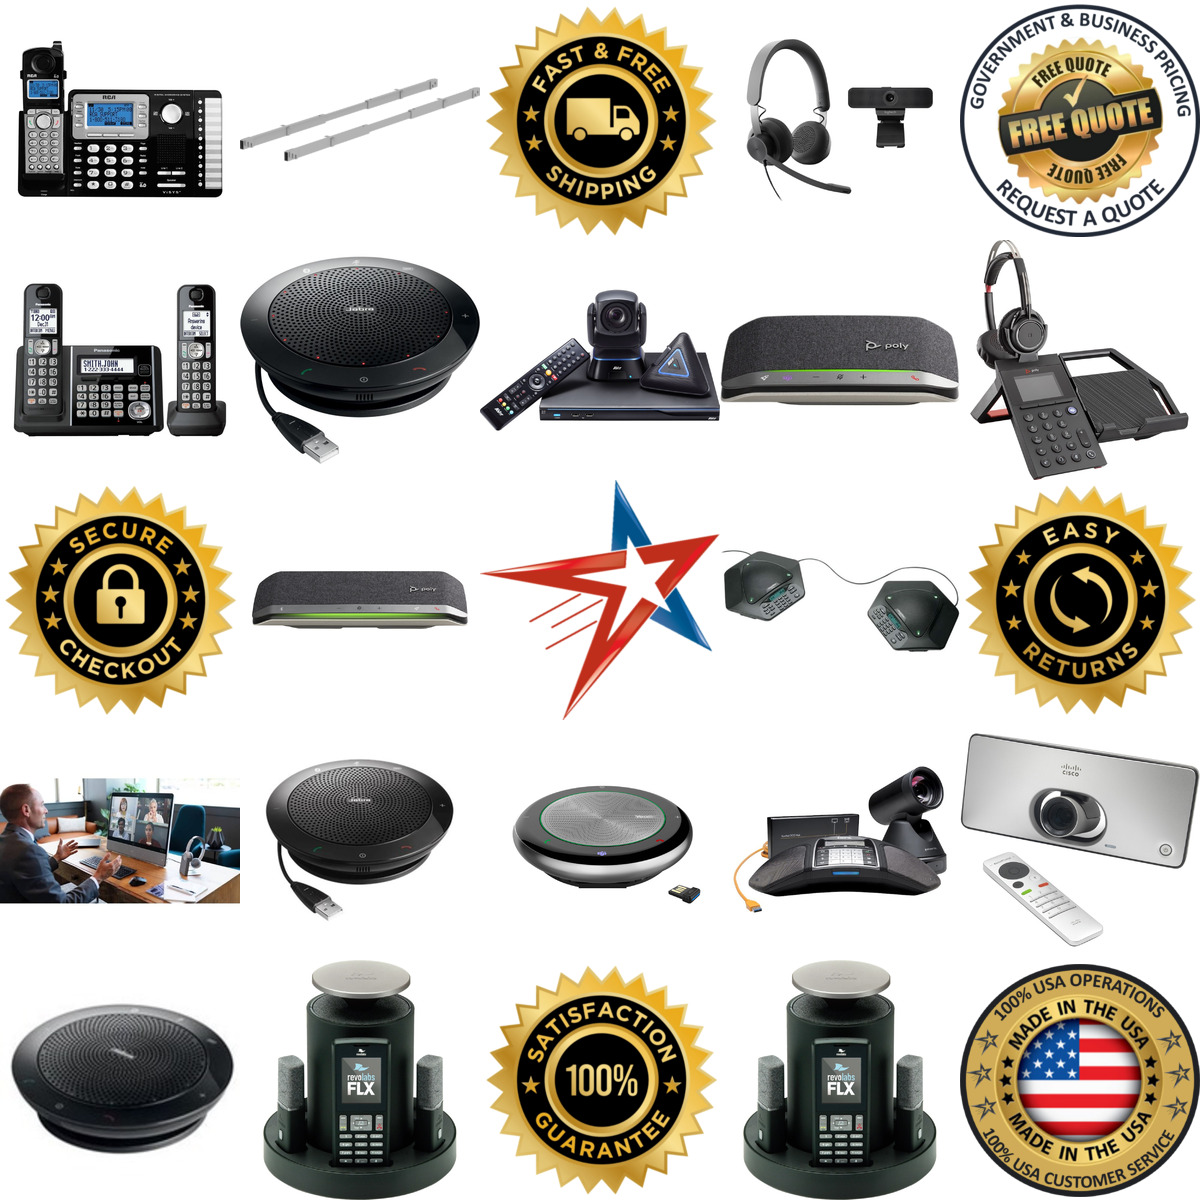 A selection of Conferencing products on GoVets